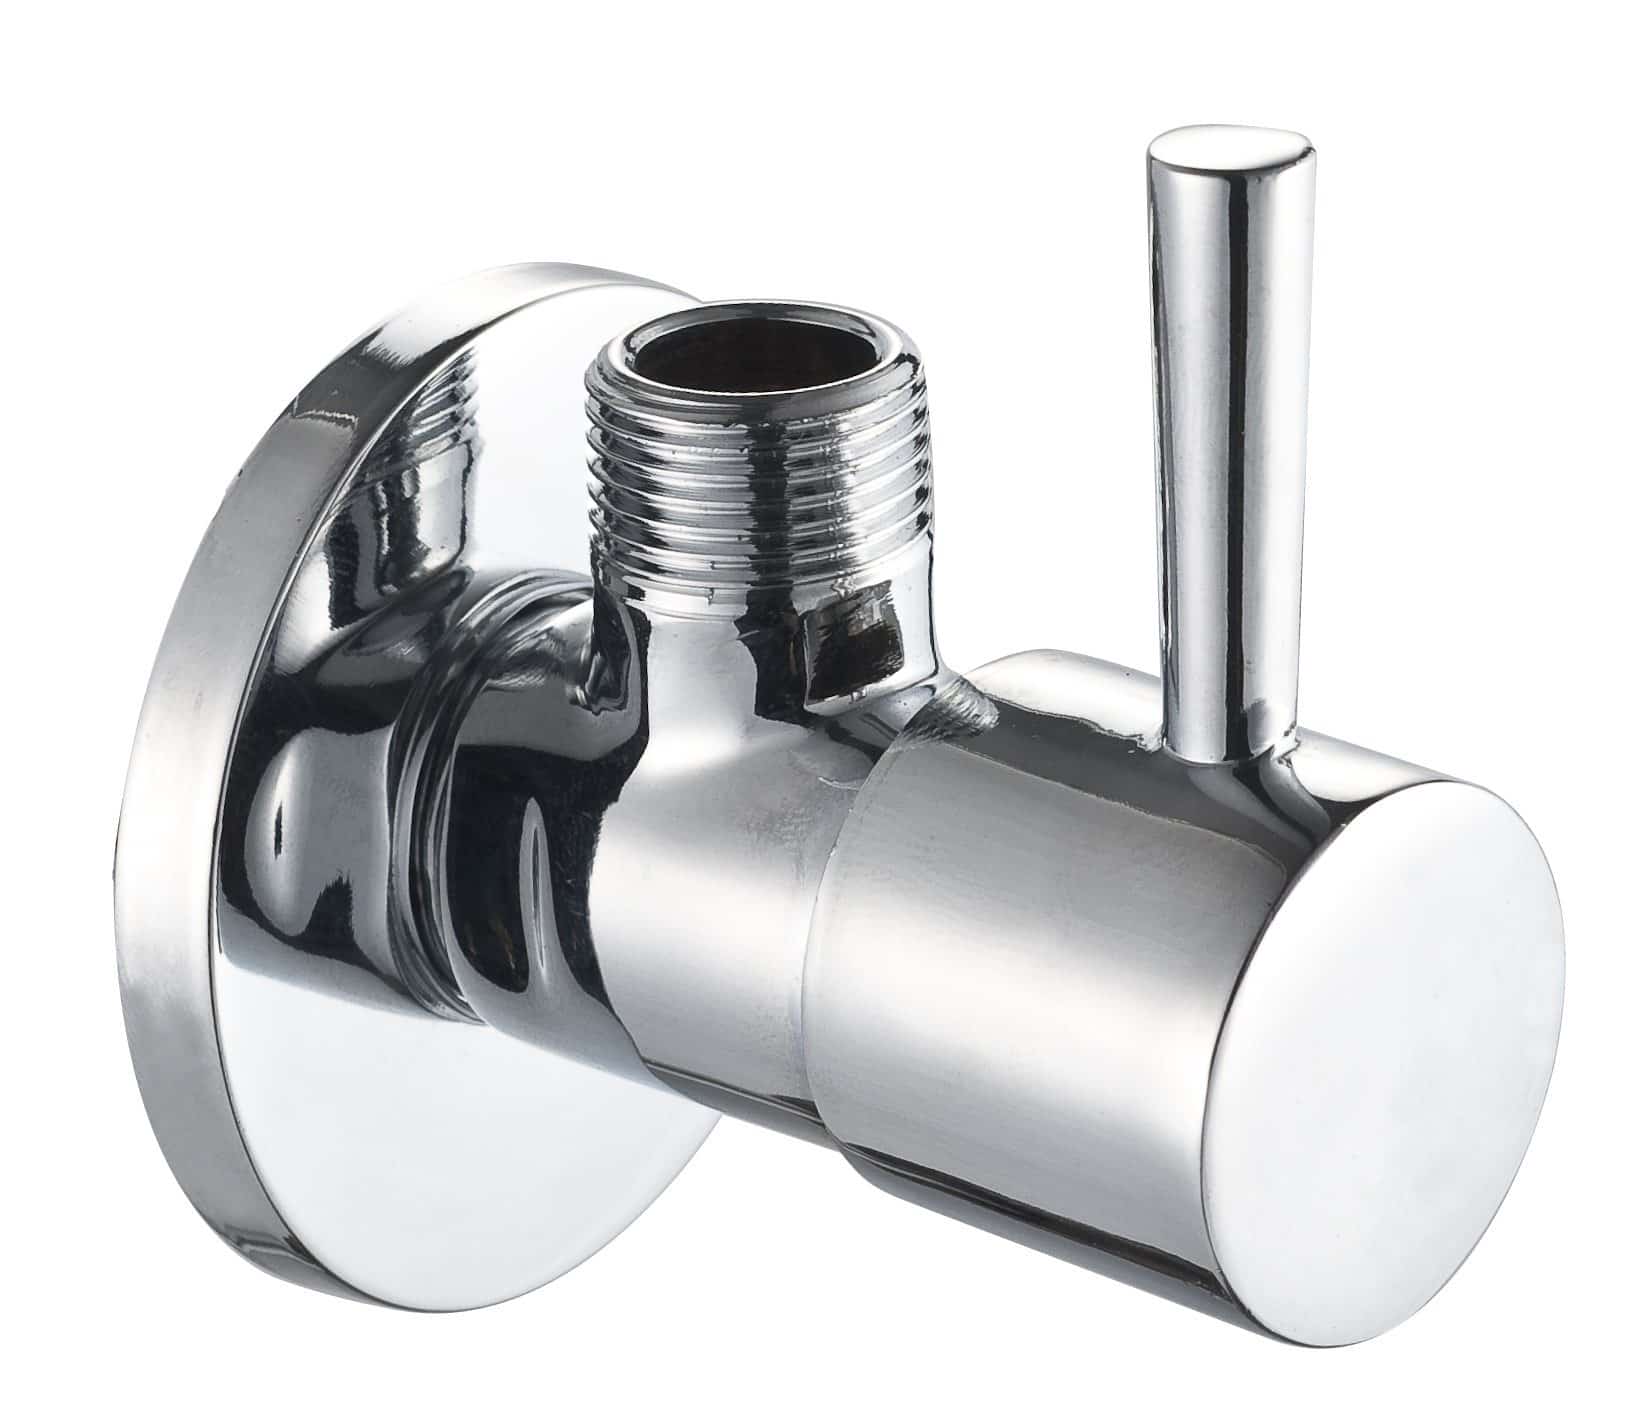 Best Angle Valves for bathrooms and Angle Valves for shower | SalusIndia